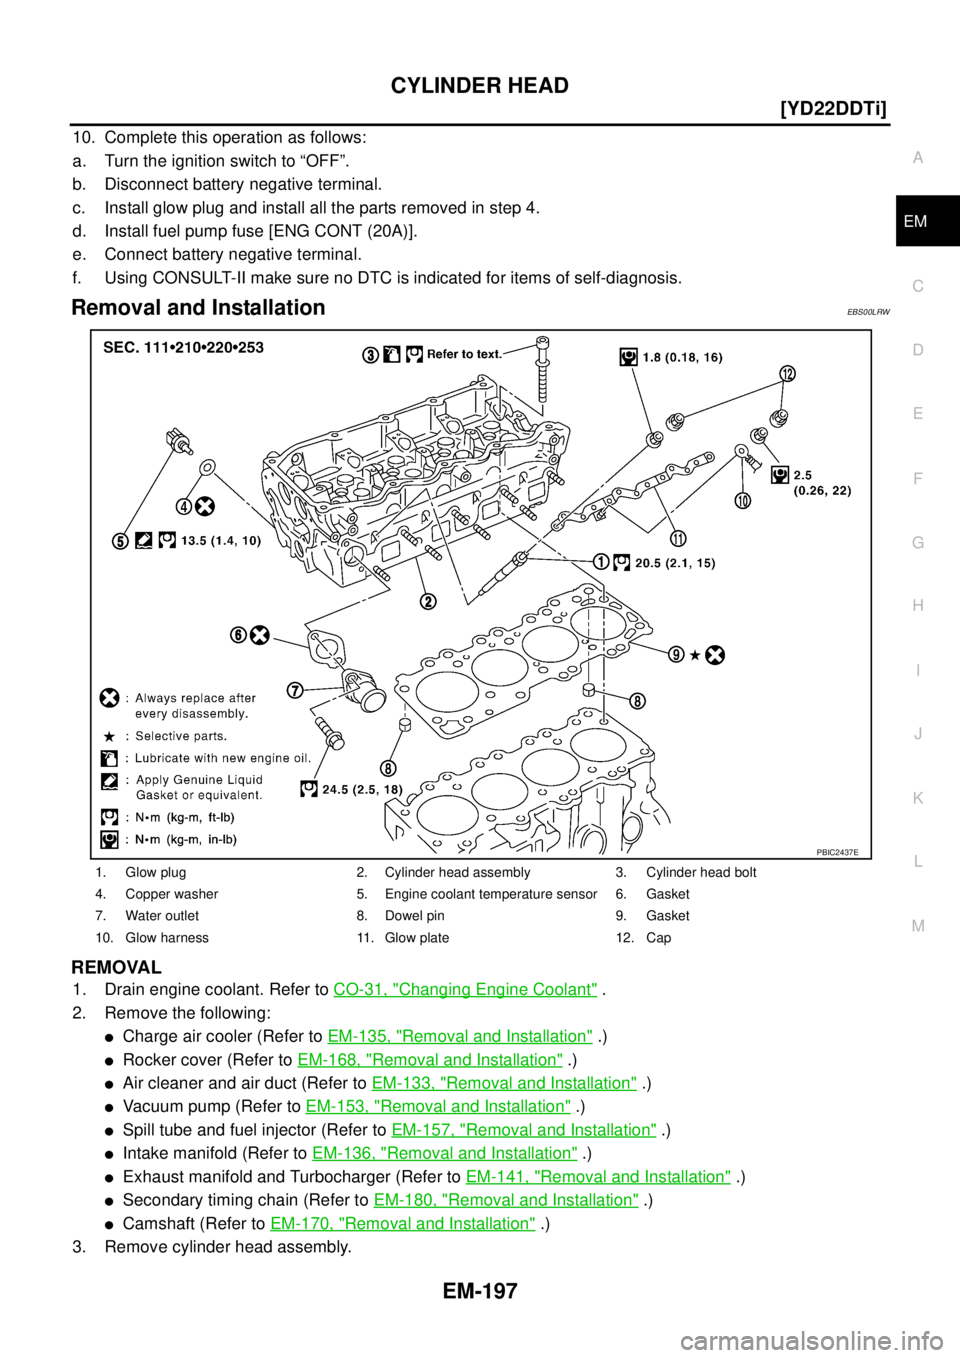 NISSAN X-TRAIL 2003  Service Repair Manual CYLINDER HEAD
EM-197
[YD22DDTi]
C
D
E
F
G
H
I
J
K
L
MA
EM
 
10. Complete this operation as follows:
a. Turn the ignition switch to “OFF”. 
b. Disconnect battery negative terminal. 
c. Install glow